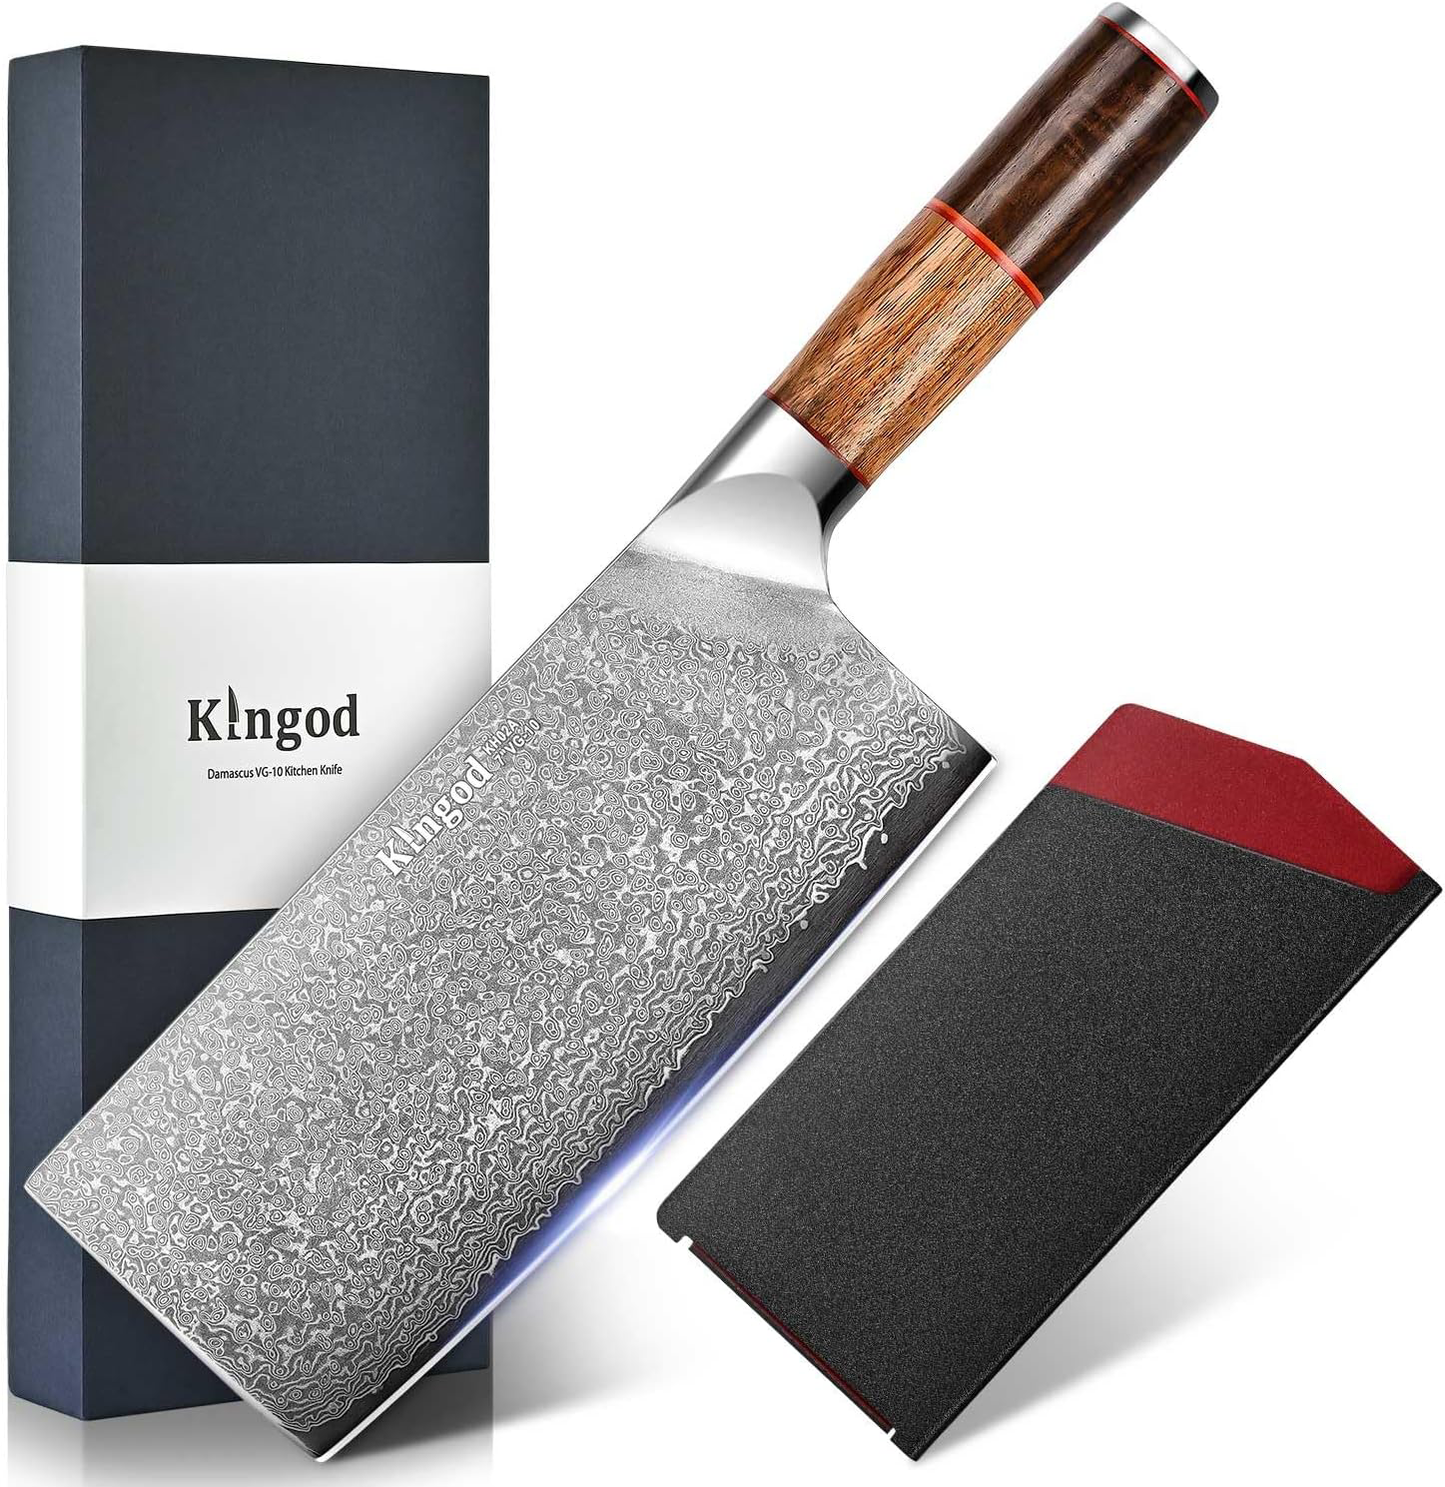 KD Japanese VG10 Damascus Meat Cleaver: Kitchen Chef Knife